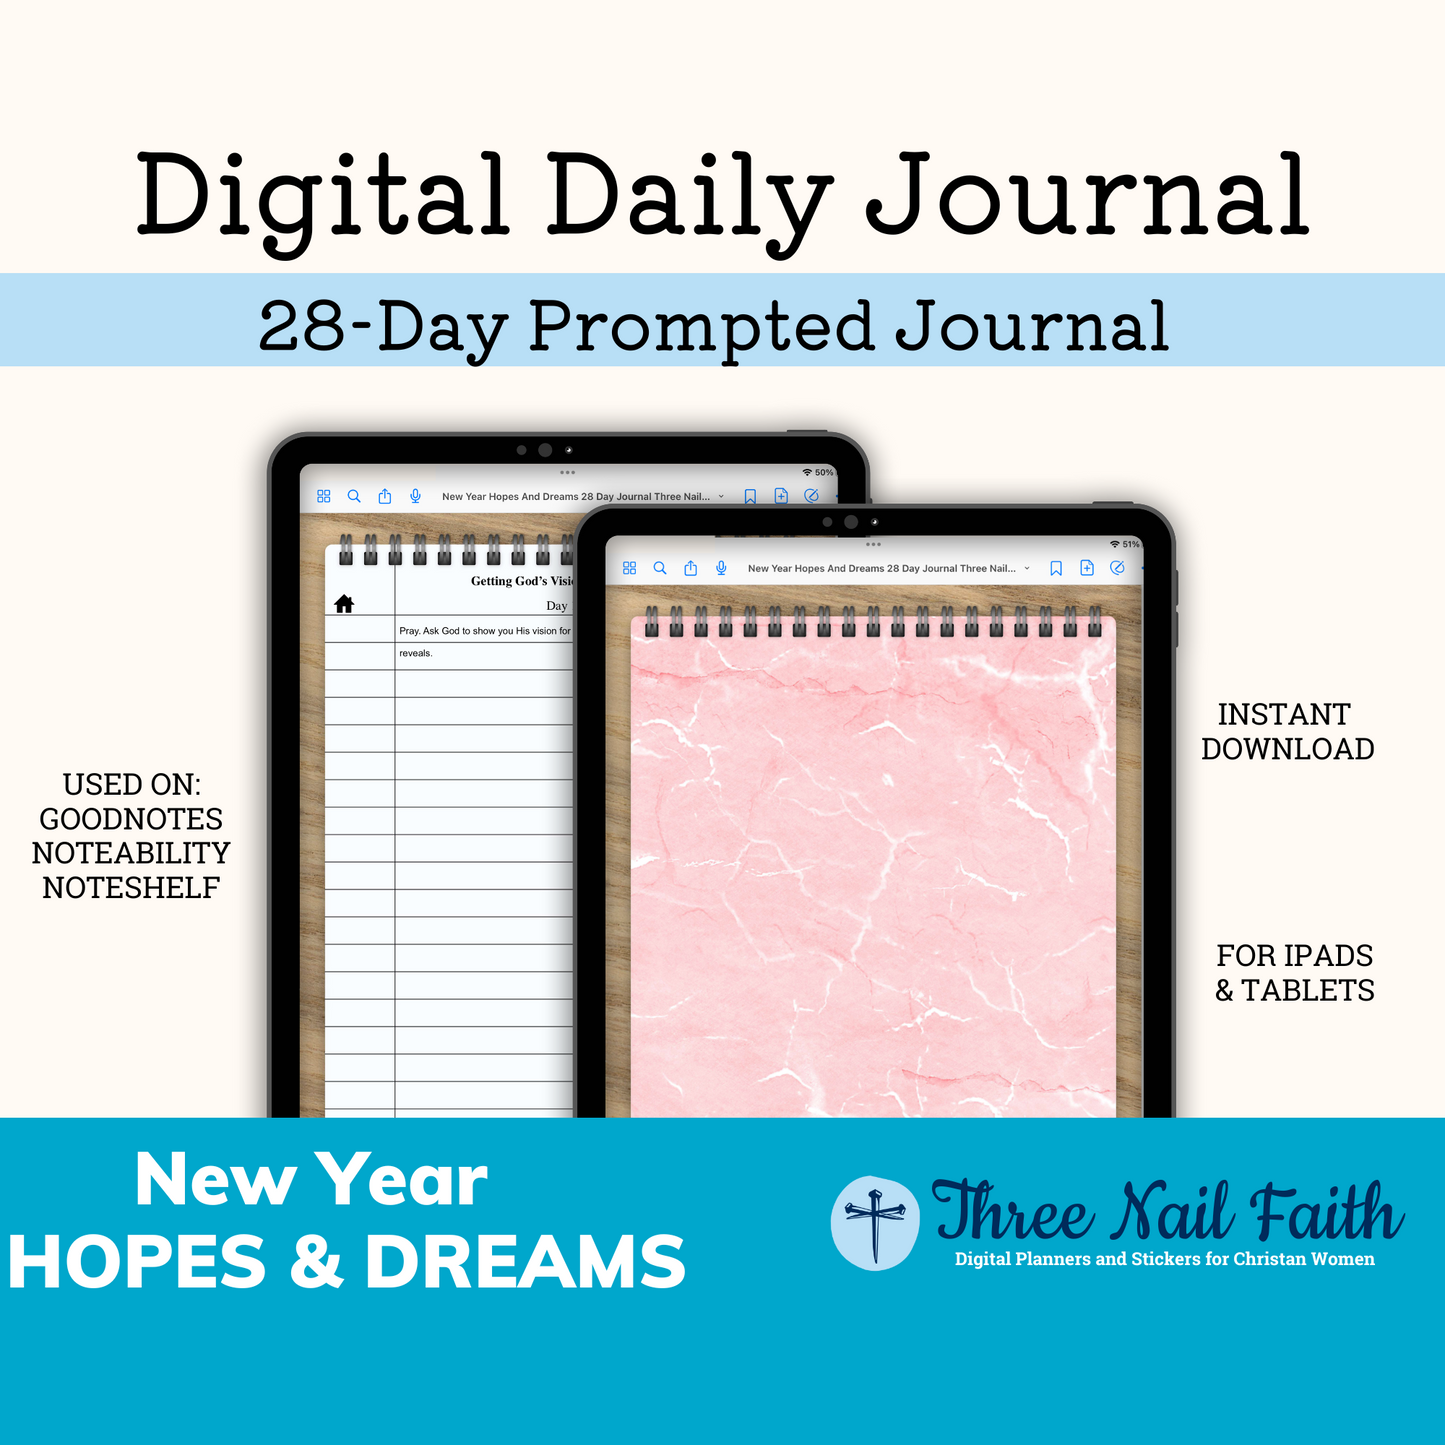 28 Day Prompted journal on the theme of new year hopes and dreams